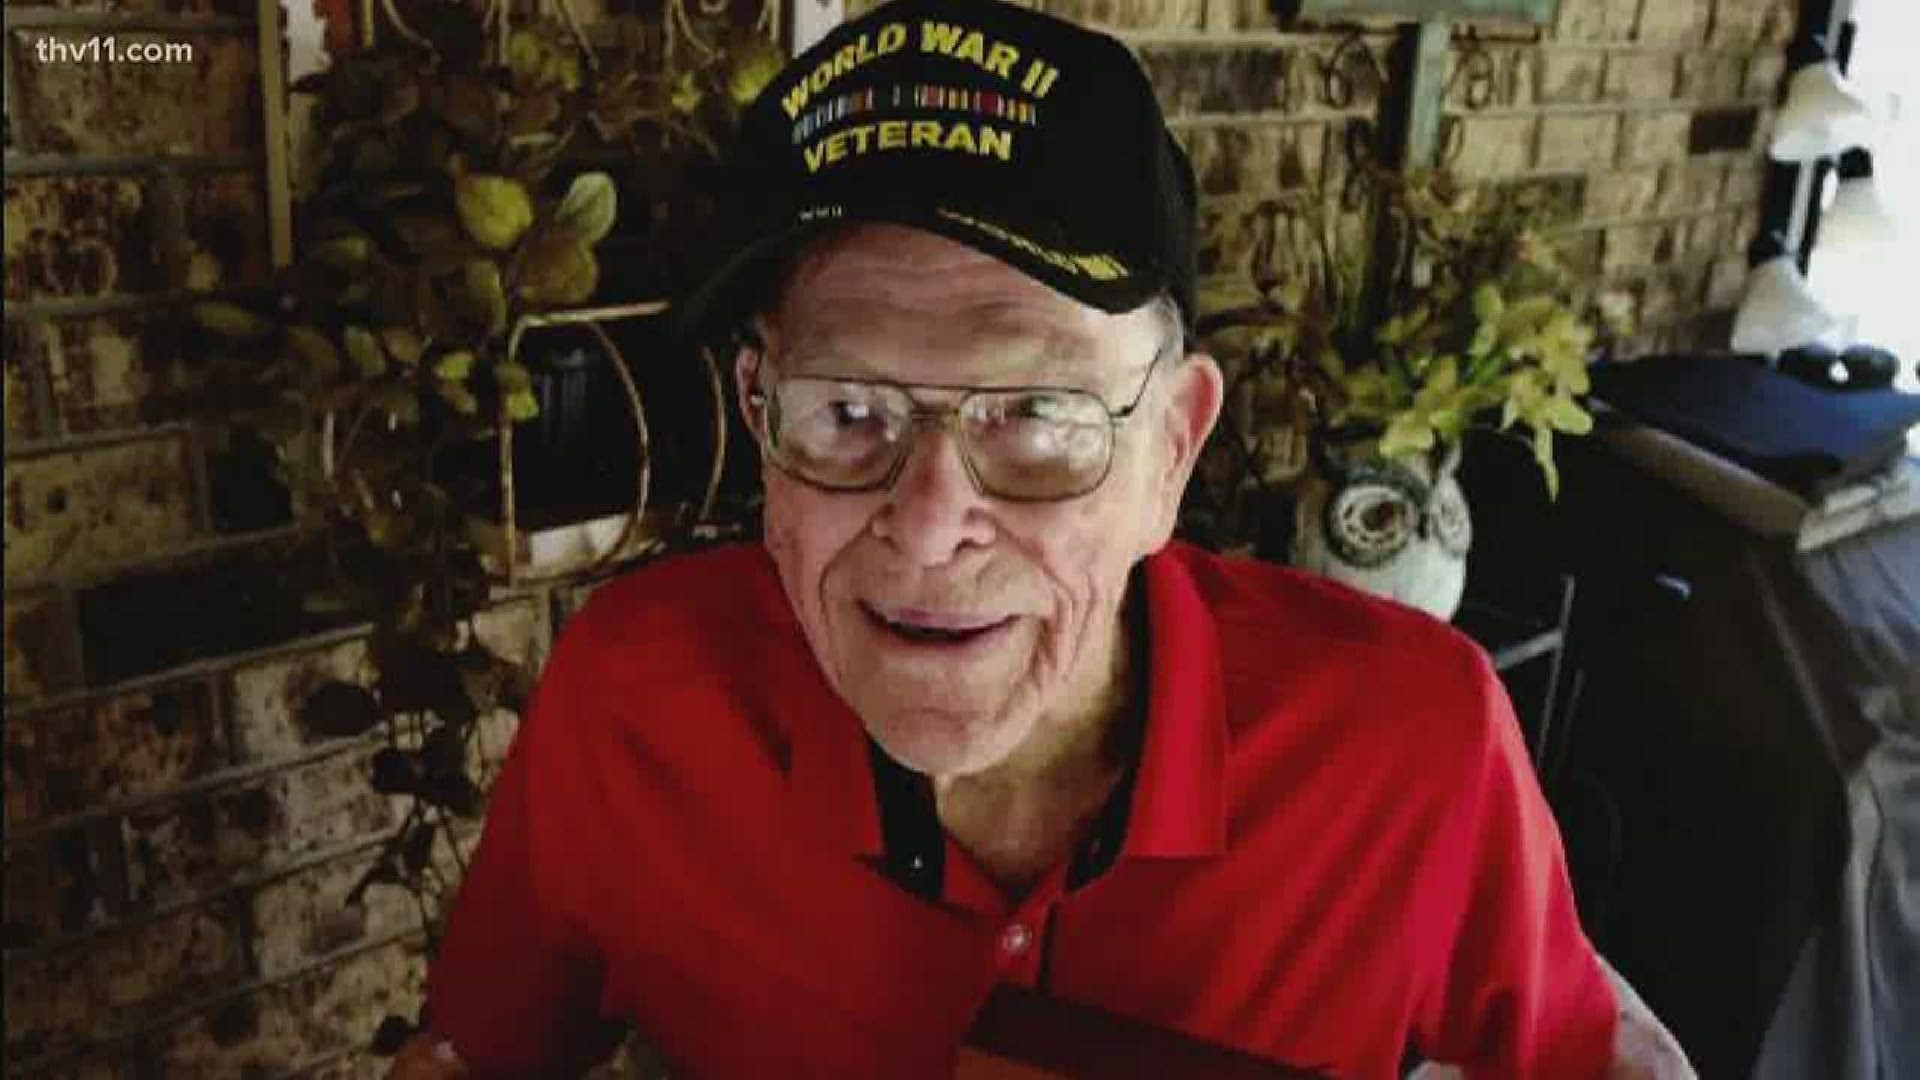 The life-long Little Rock resident just celebrated his 100th birthday this past week.